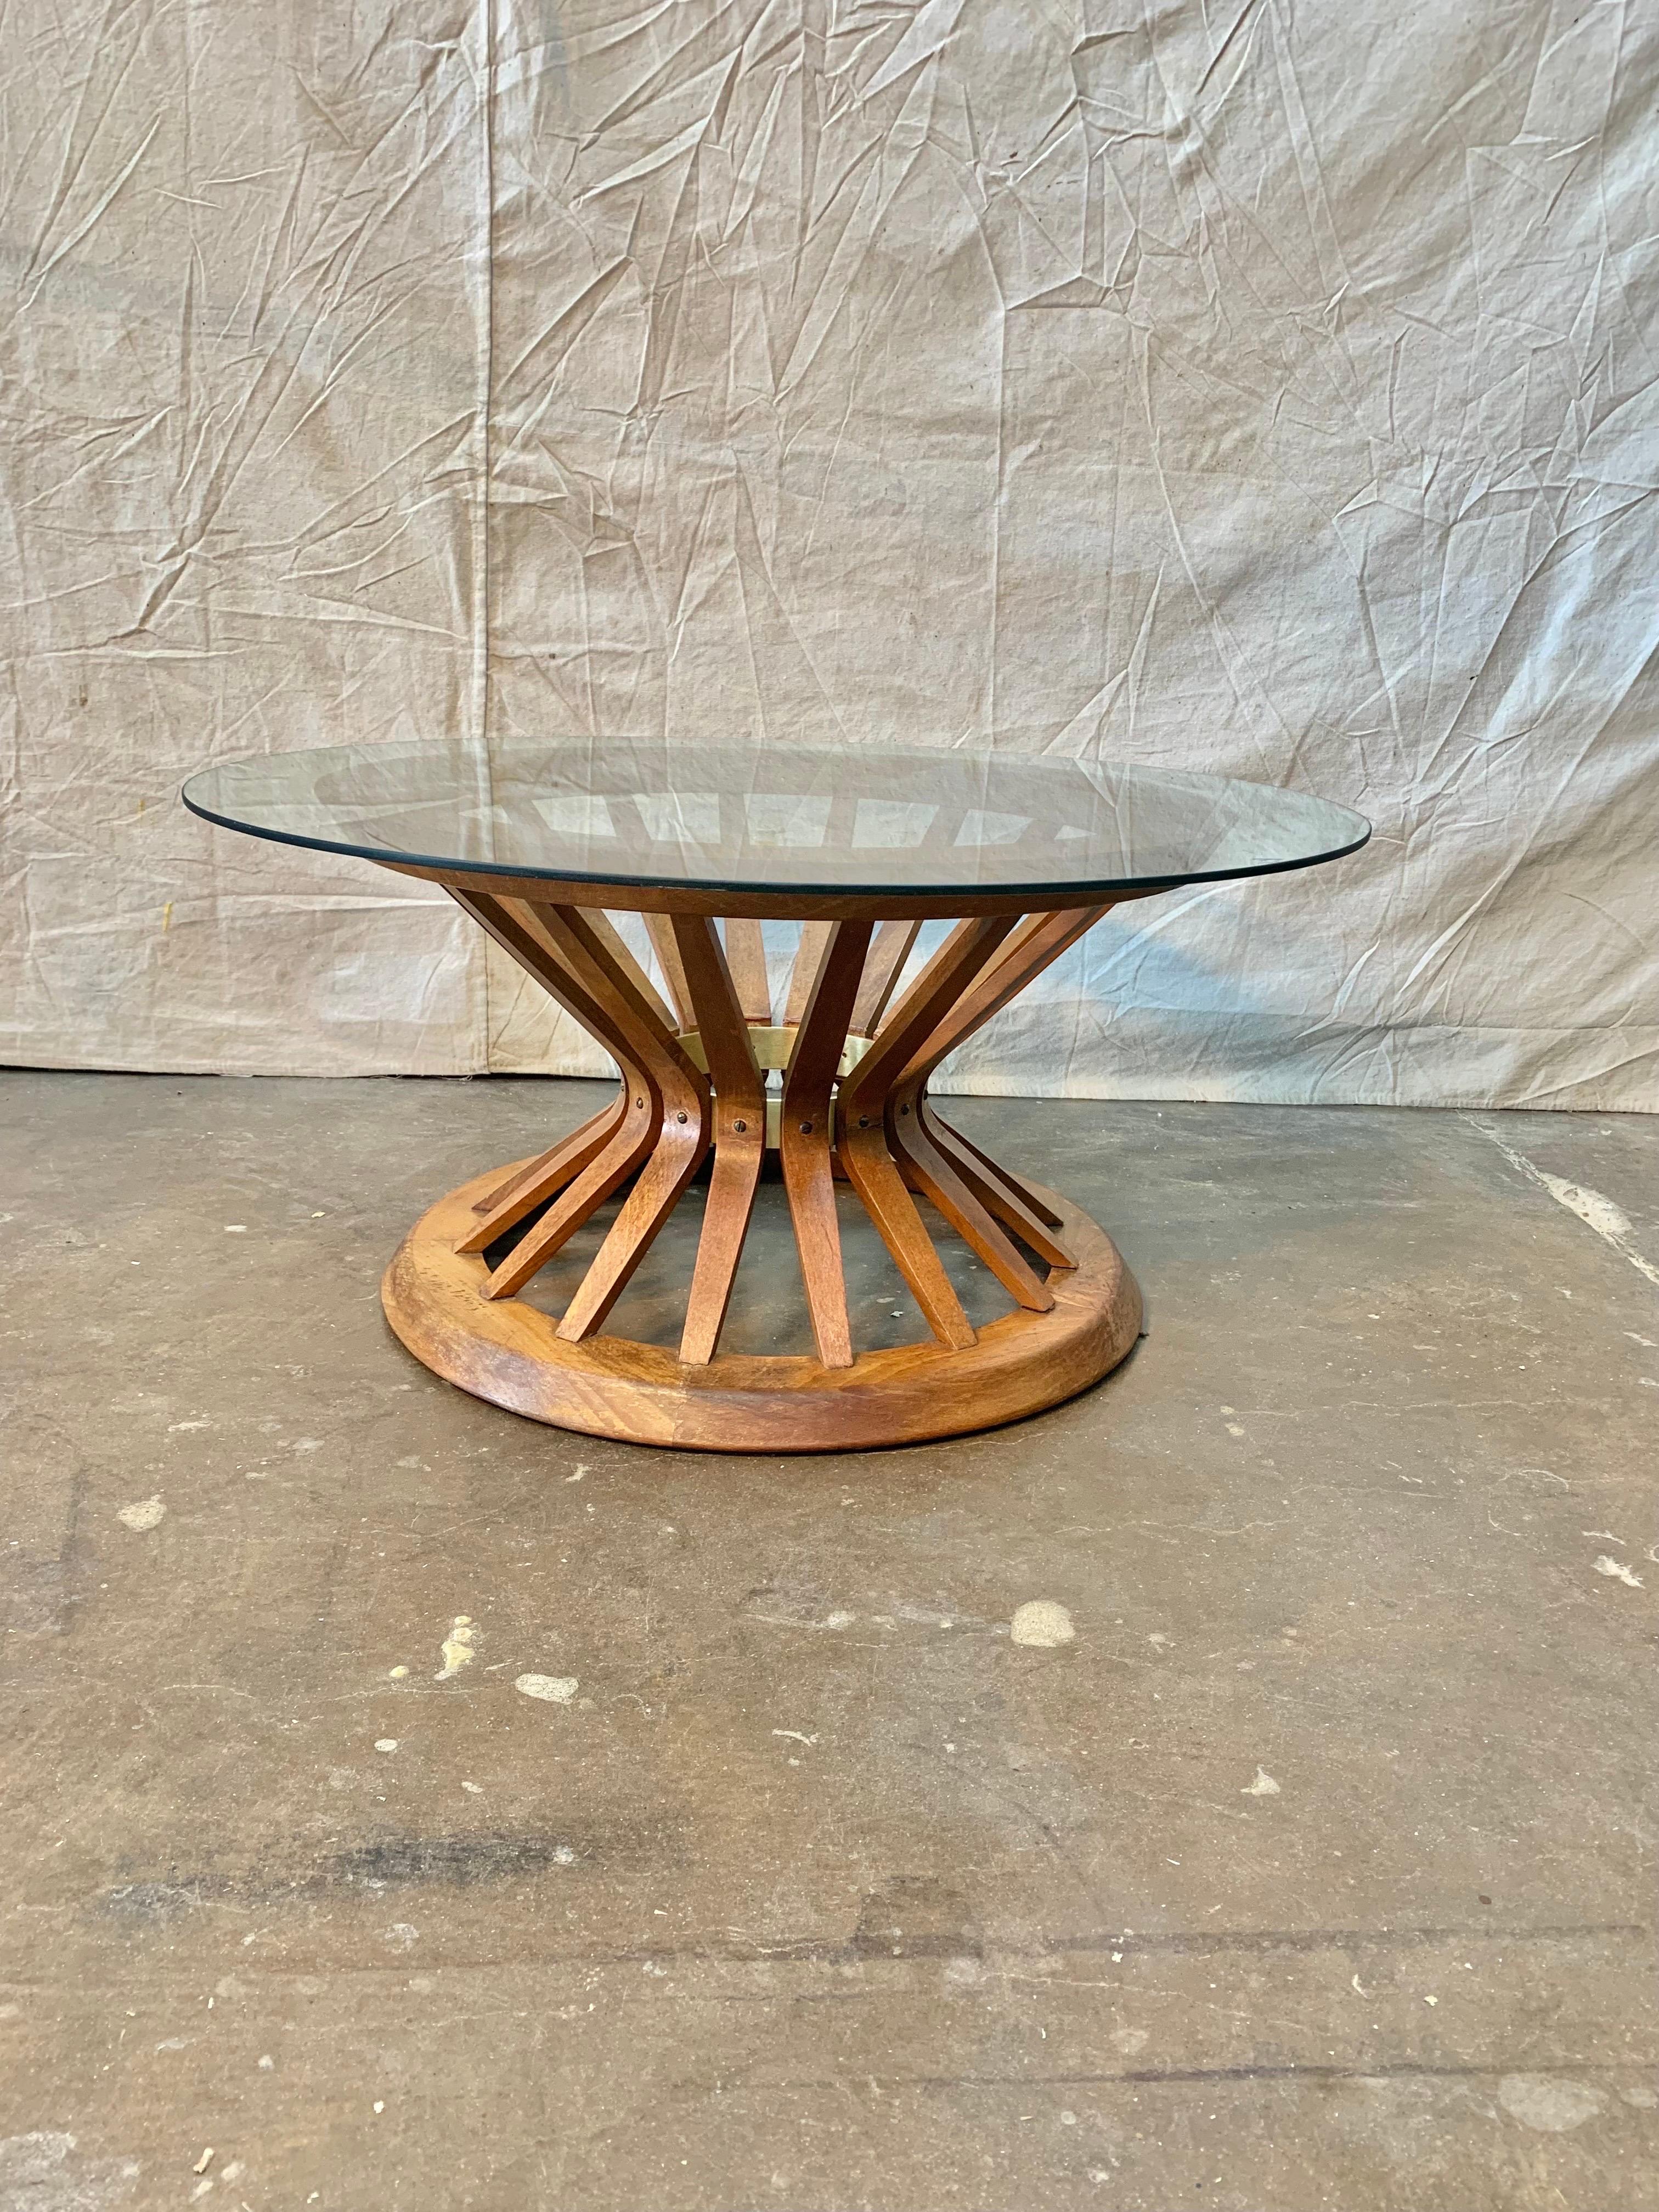 This Sheaf of Wheat Coffee or Cocktail Table was created in the 1960's and designed by Edward Wormley for Dunbar. The spindel base is crafted from walnut and bound with a brass interior band inspired by the natural beauty of a sheaf of wheat. The